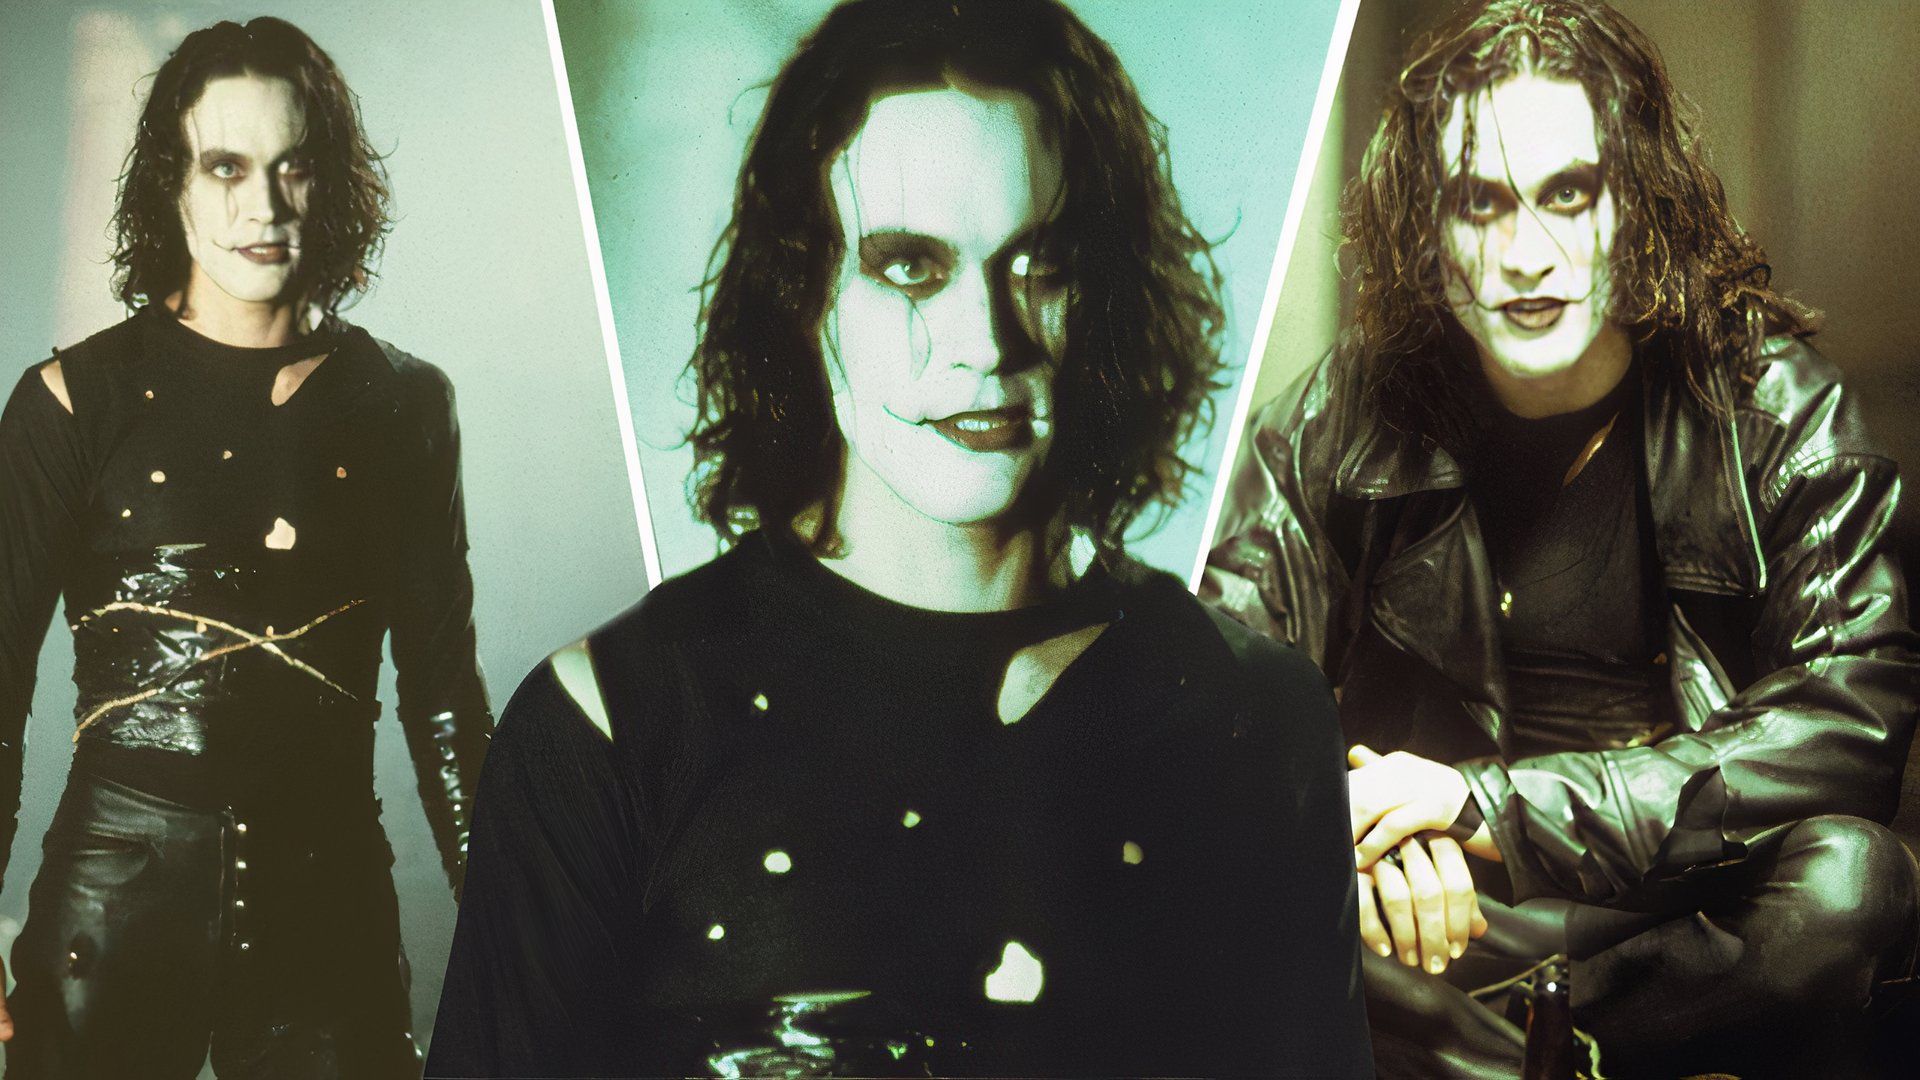 An edited image of Brandon Lee wearing a black leather jacket and black shirt in The Crow